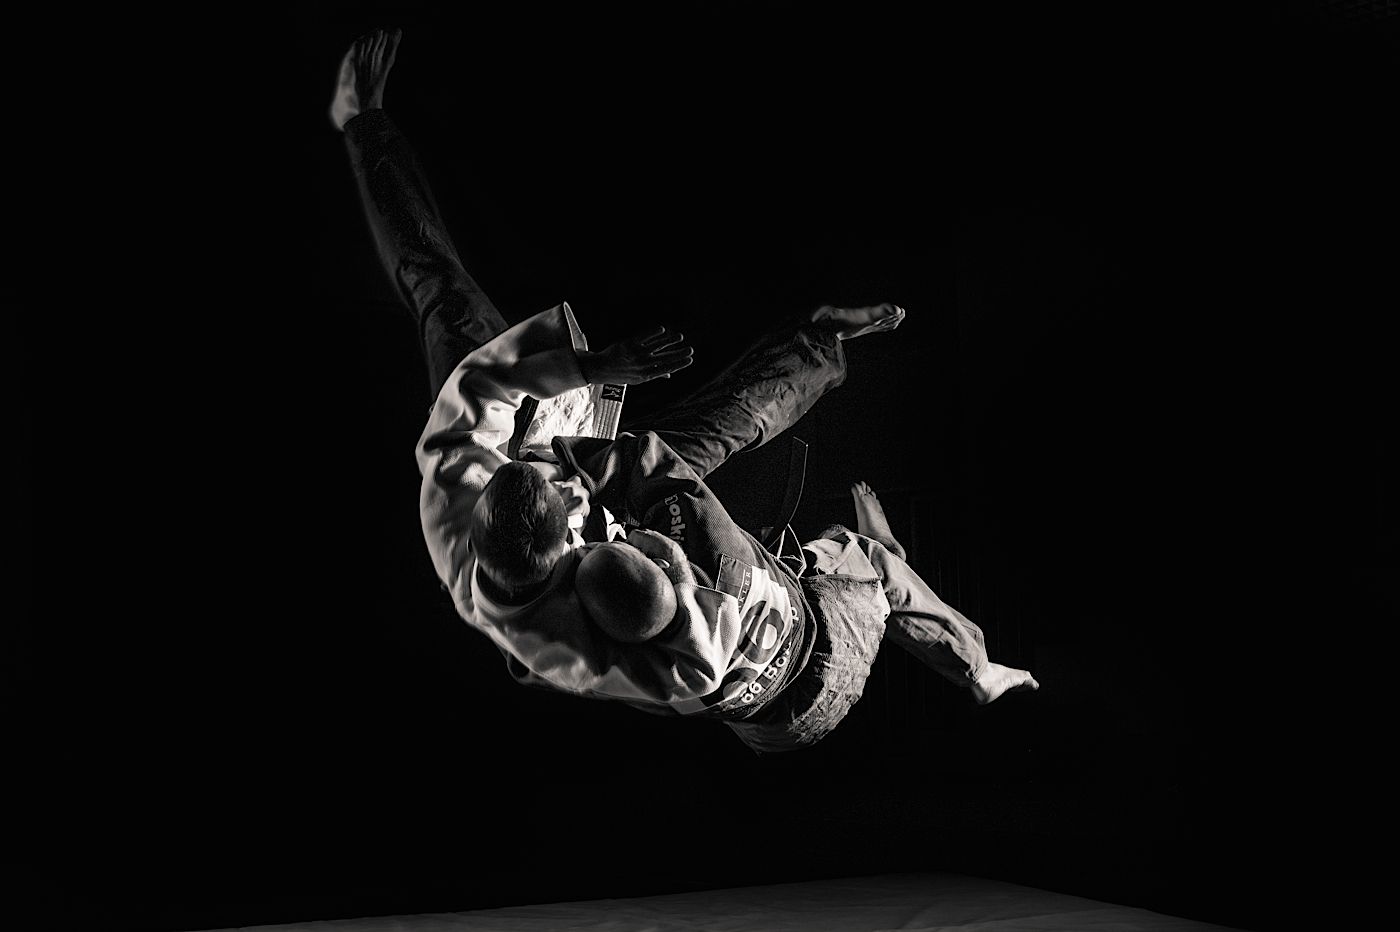 Judo Shooting.with Strobes and a Leica by Jochen Kohl. Steve Huff Photo